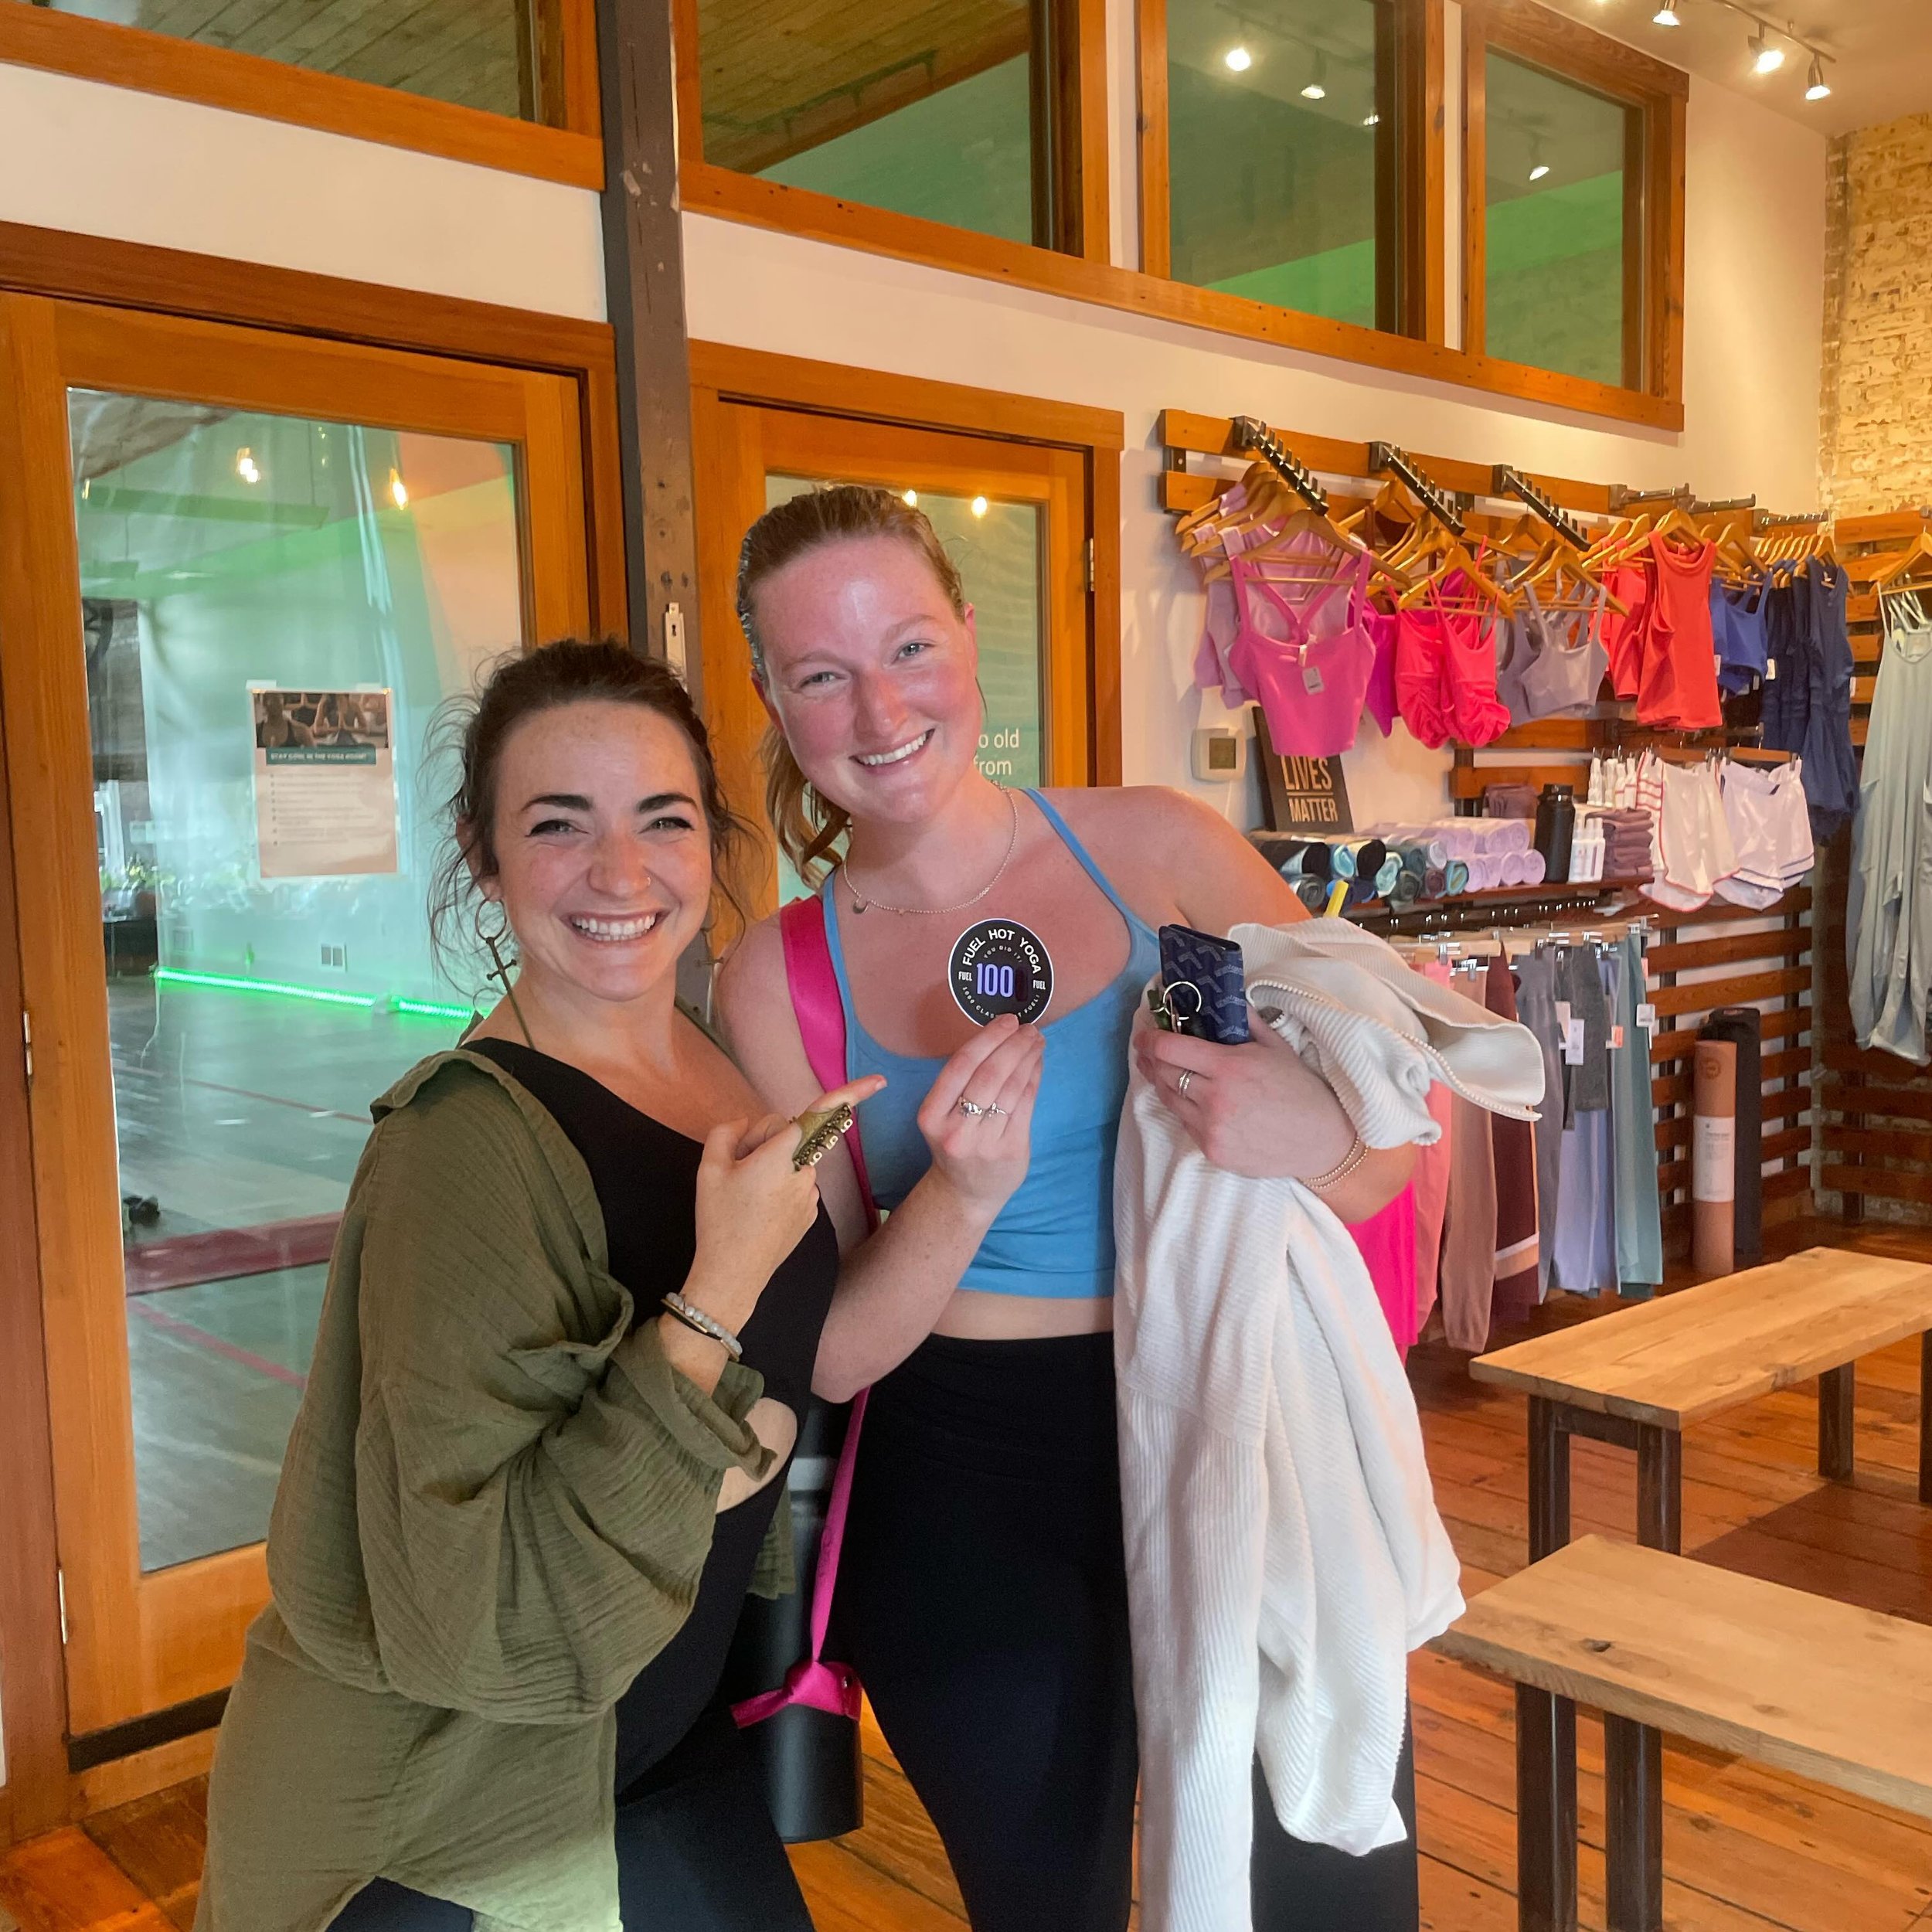 We love celebrating our member milestones 🤗Congratulations Clare on hitting 100 classes today at Fuel 🙌 Amazing! You inspire us so much 🔥

Get our new Fuel app 📲 to track how many classes you&rsquo;ve done at Fuel. It&rsquo;s so much fun collecti